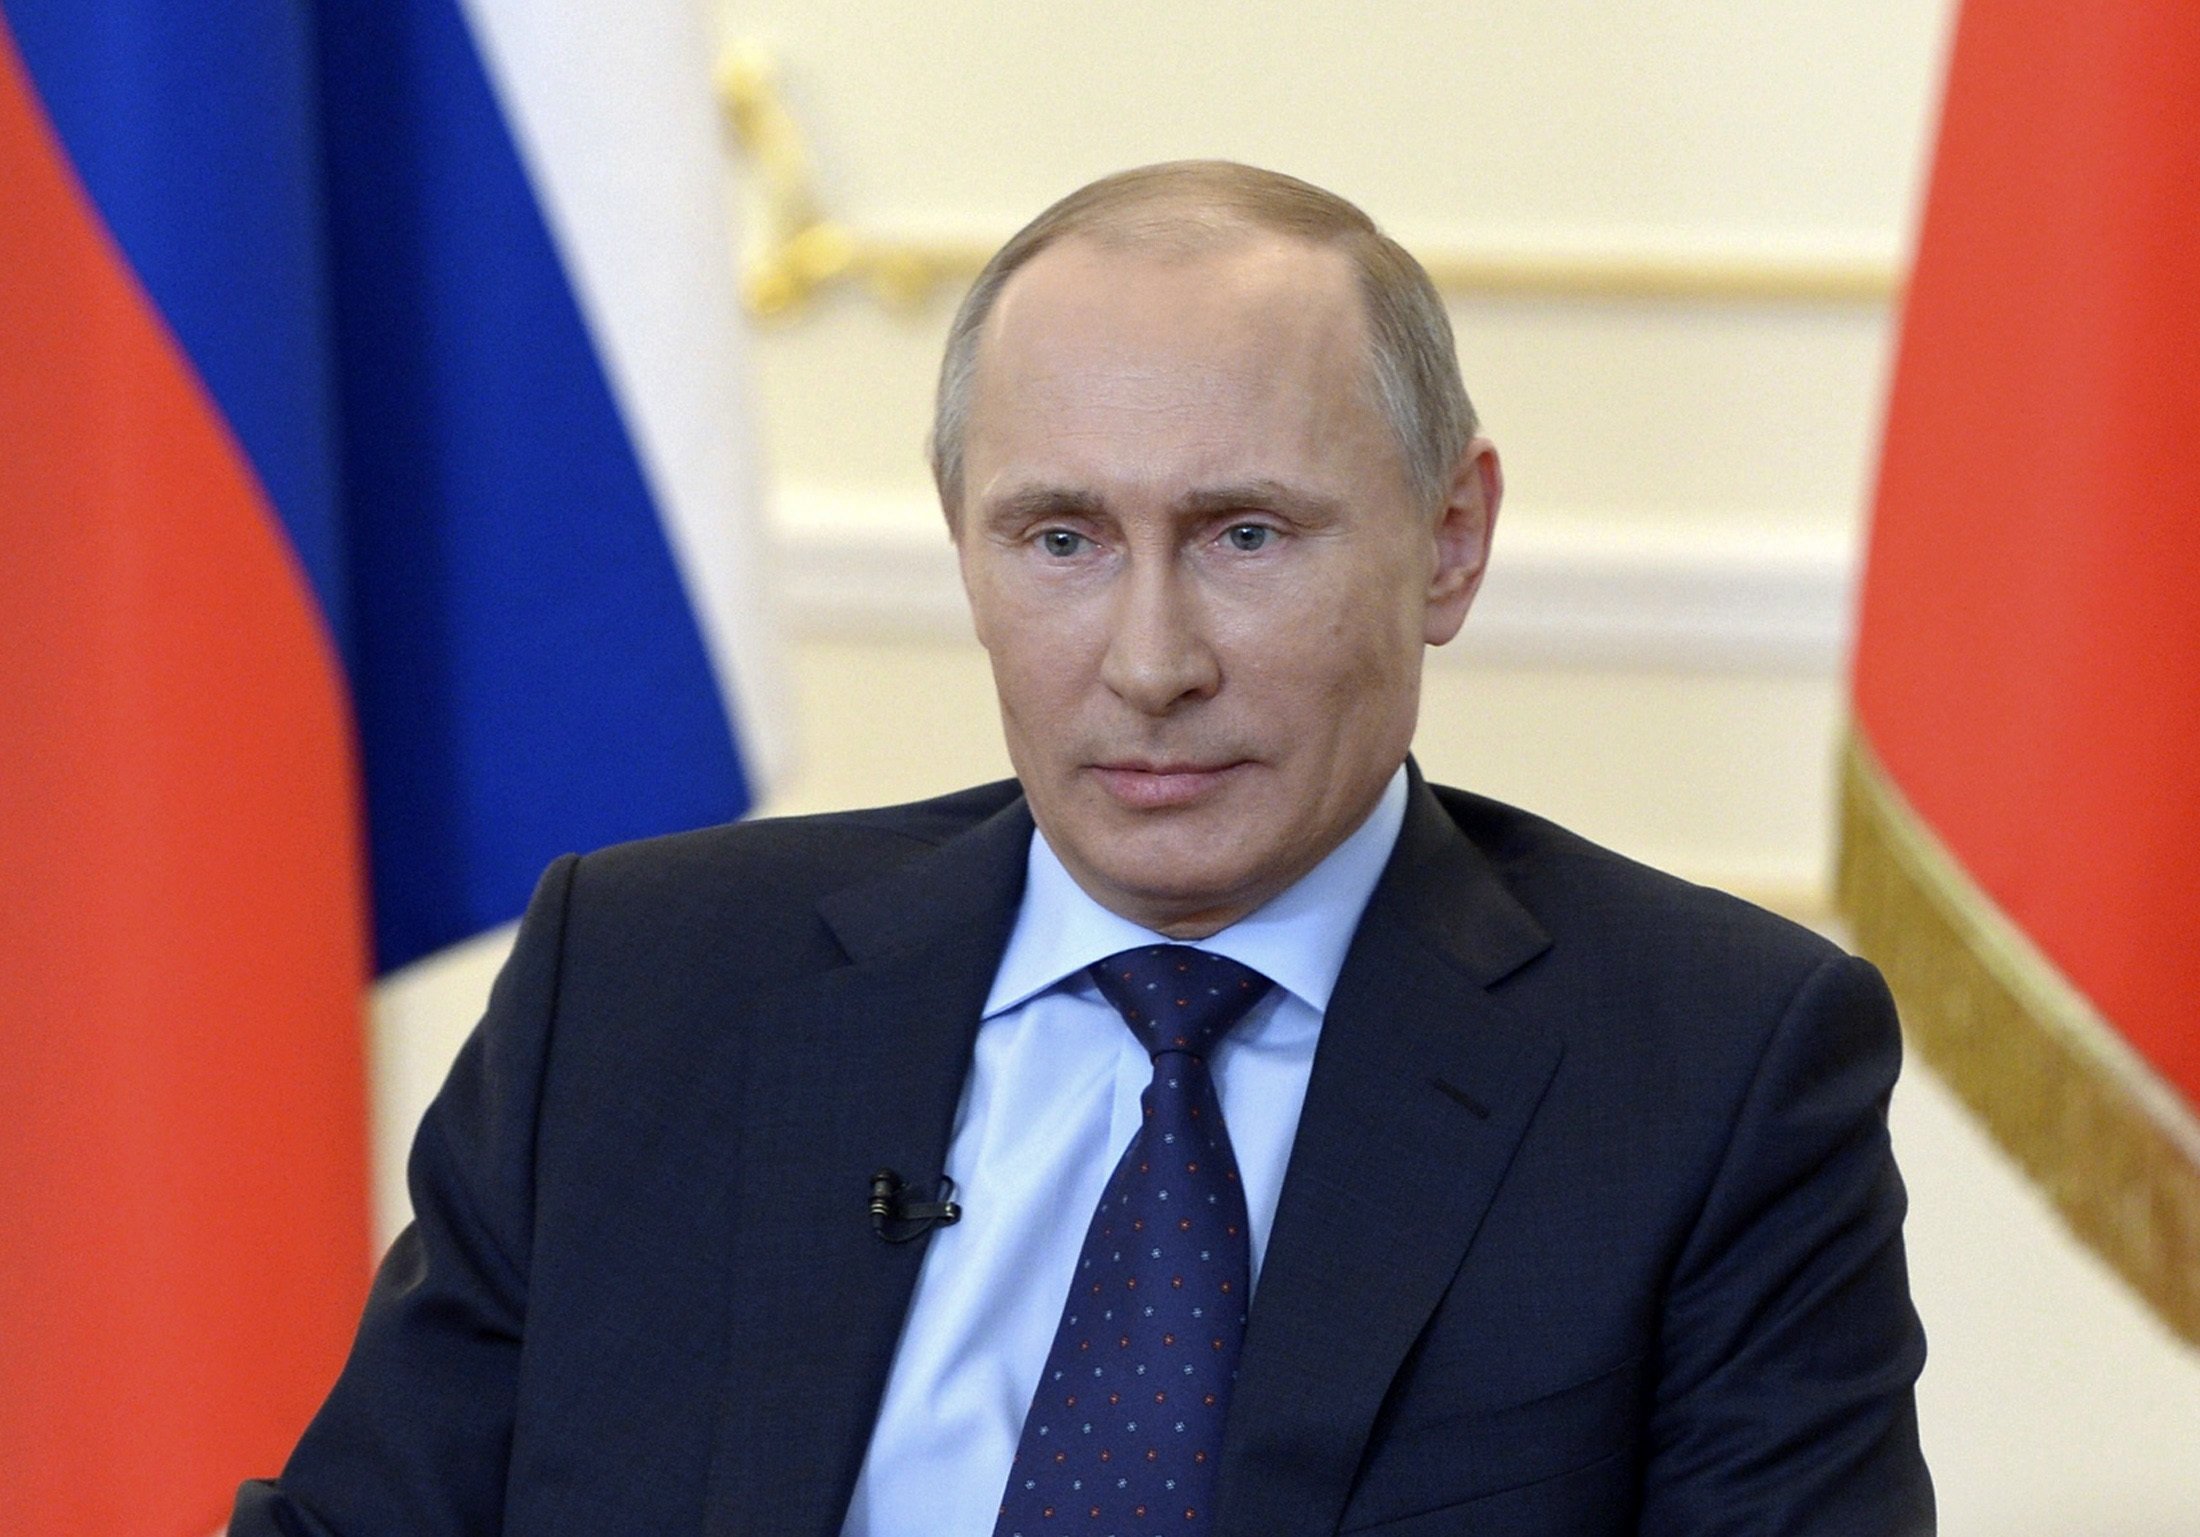 Russian President Putin takes part in a news conference at the Novo-Ogaryovo state residence outside Moscow